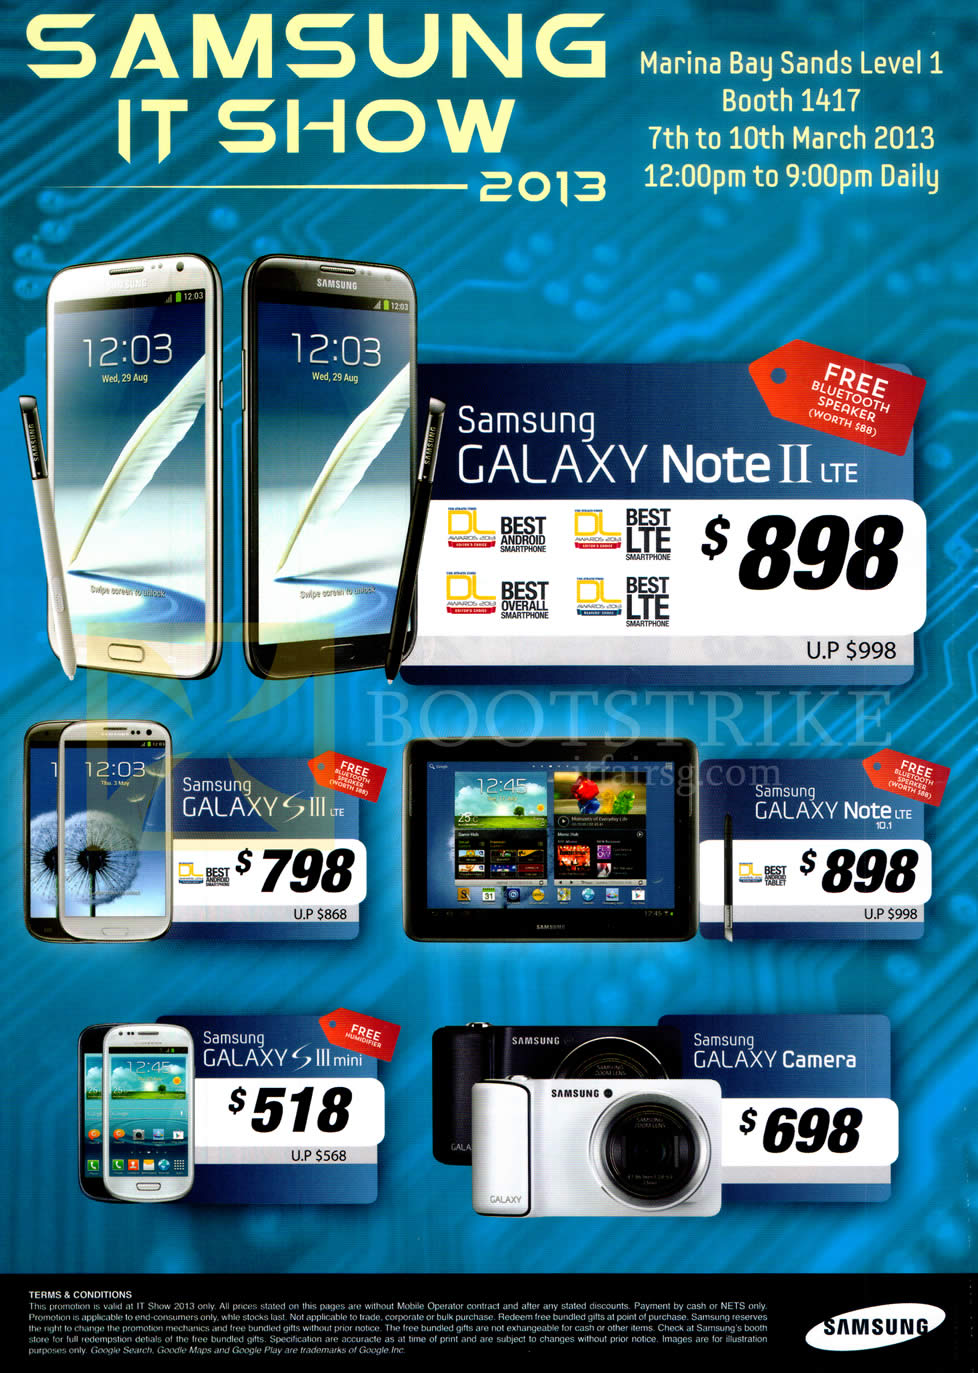 IT SHOW 2013 price list image brochure of Samsung Mobile Phones Galaxy Note II LTE, Galaxy S III LTE, Galaxy Note 10.1 LTE, Galaxy S III Mini, Galaxy Camera